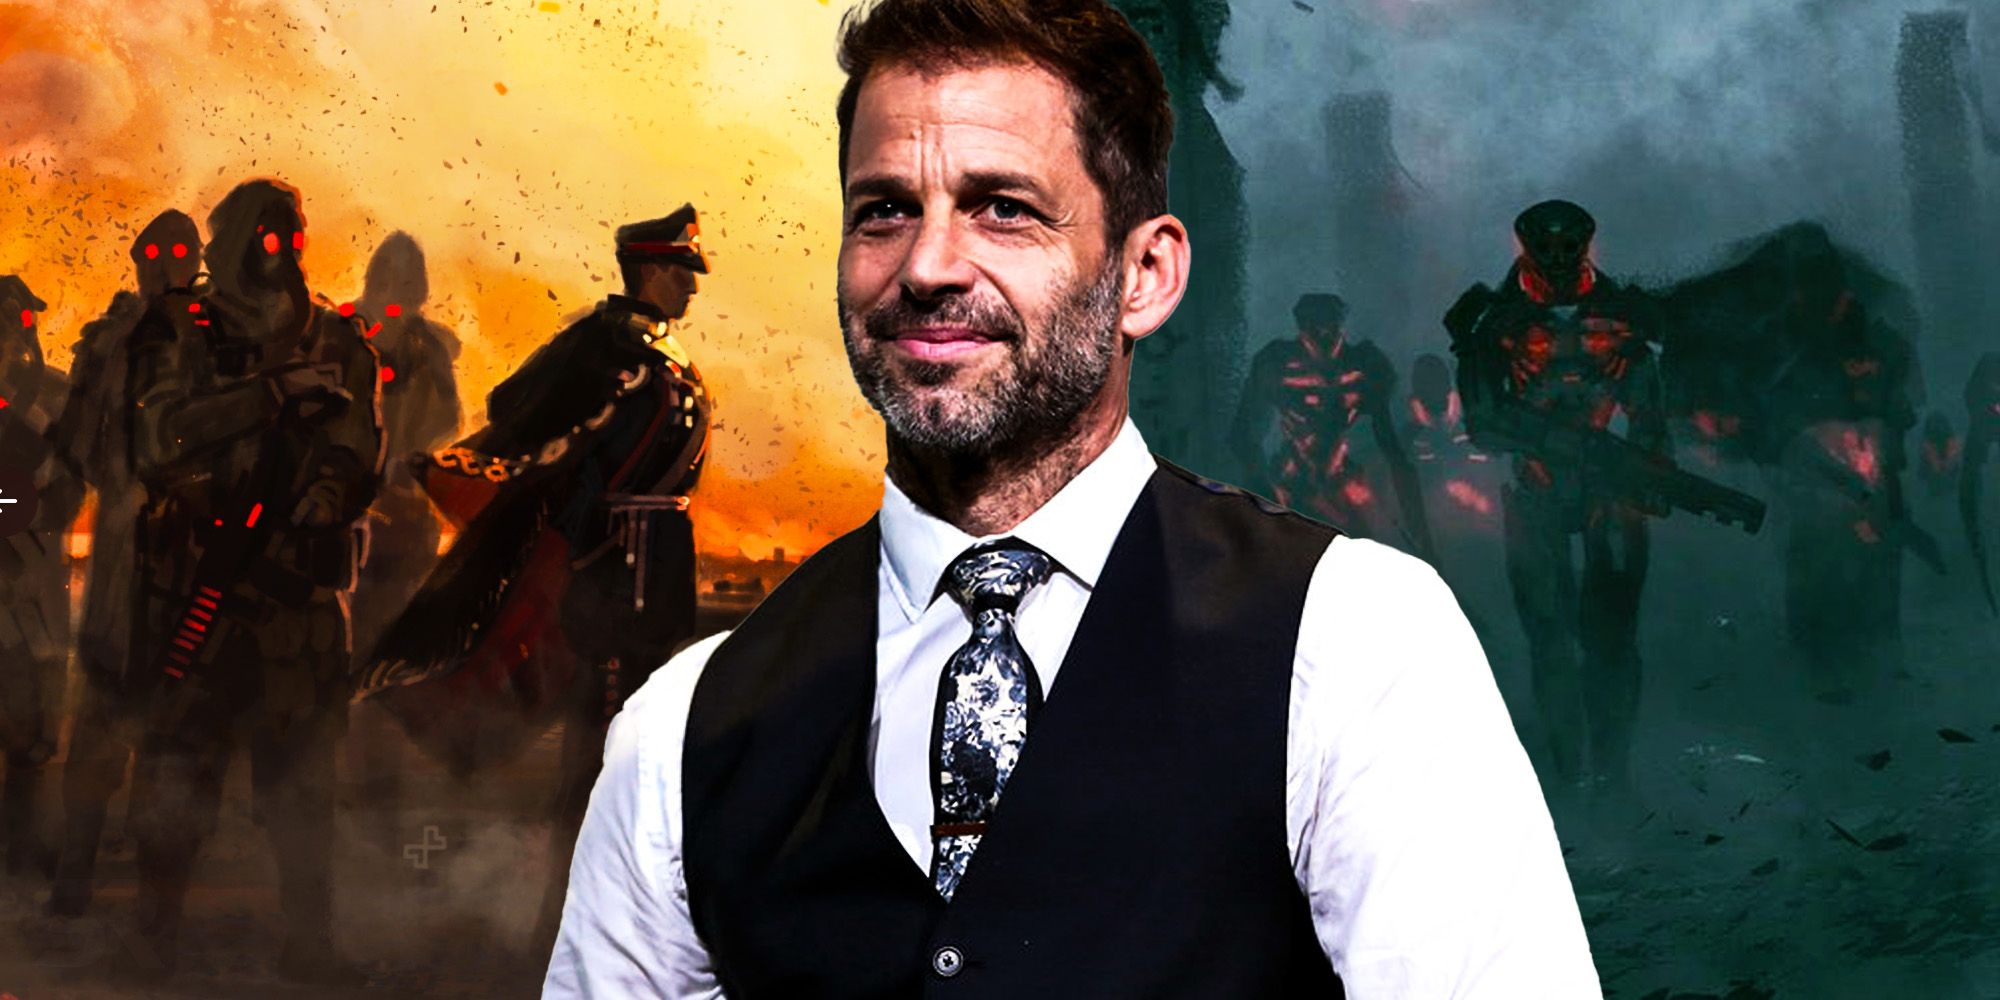 Rebel Moon: Everything We Know About The Zack Snyder Movie's Story